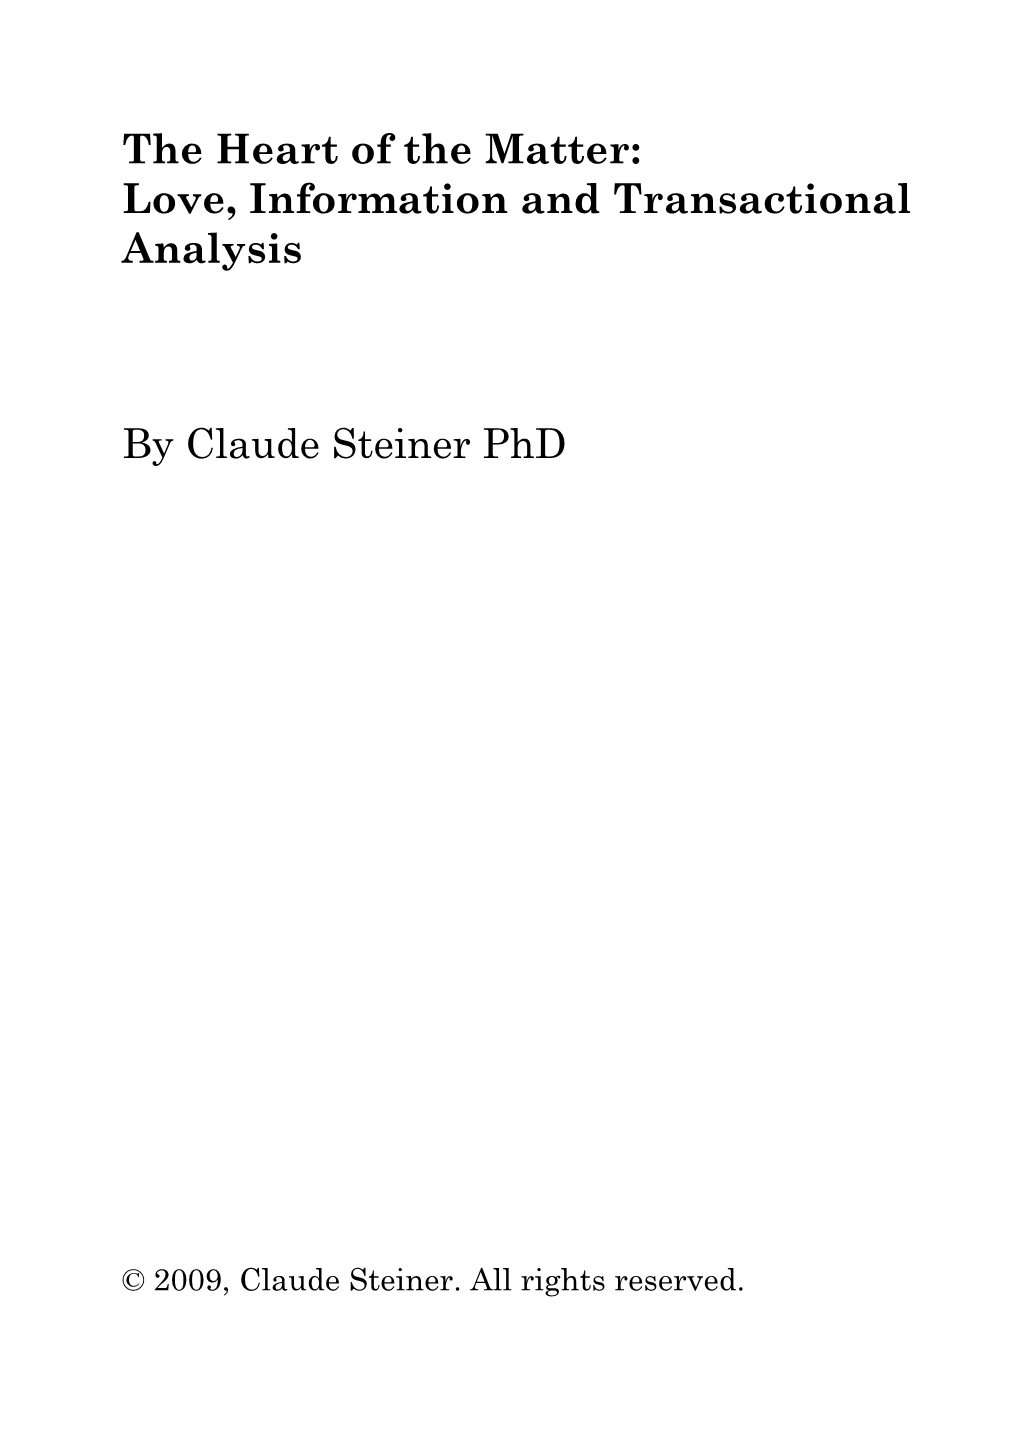 Love, Information and Transactional Analysis by Claude Steiner